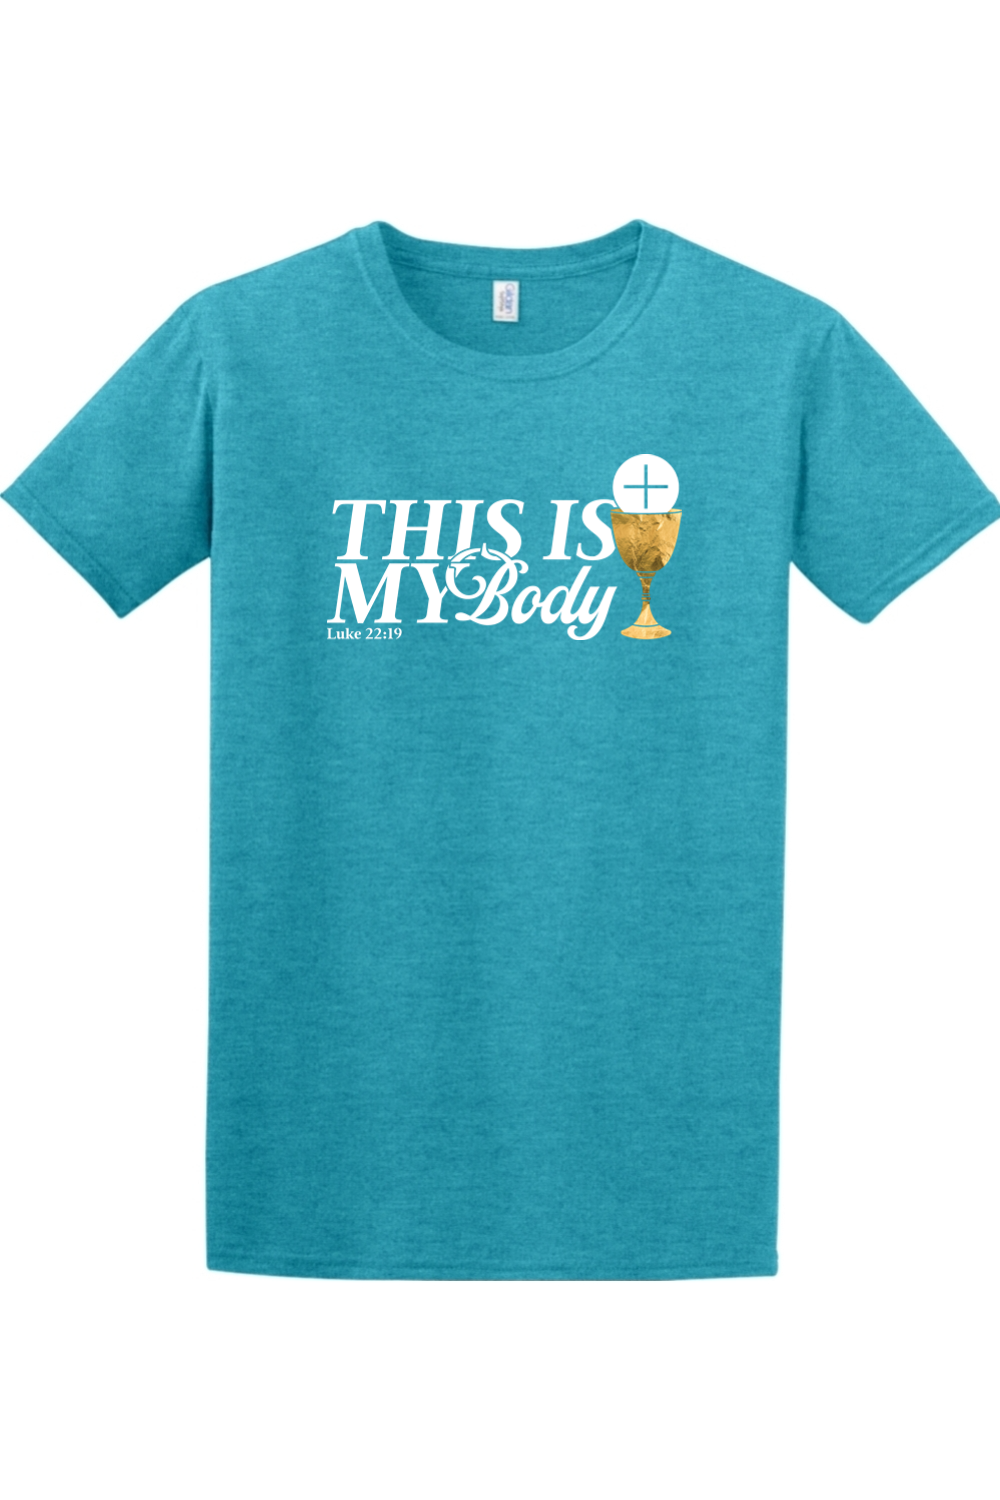 This is My Body Chalice - Luke 22:19 Adult T-Shirt